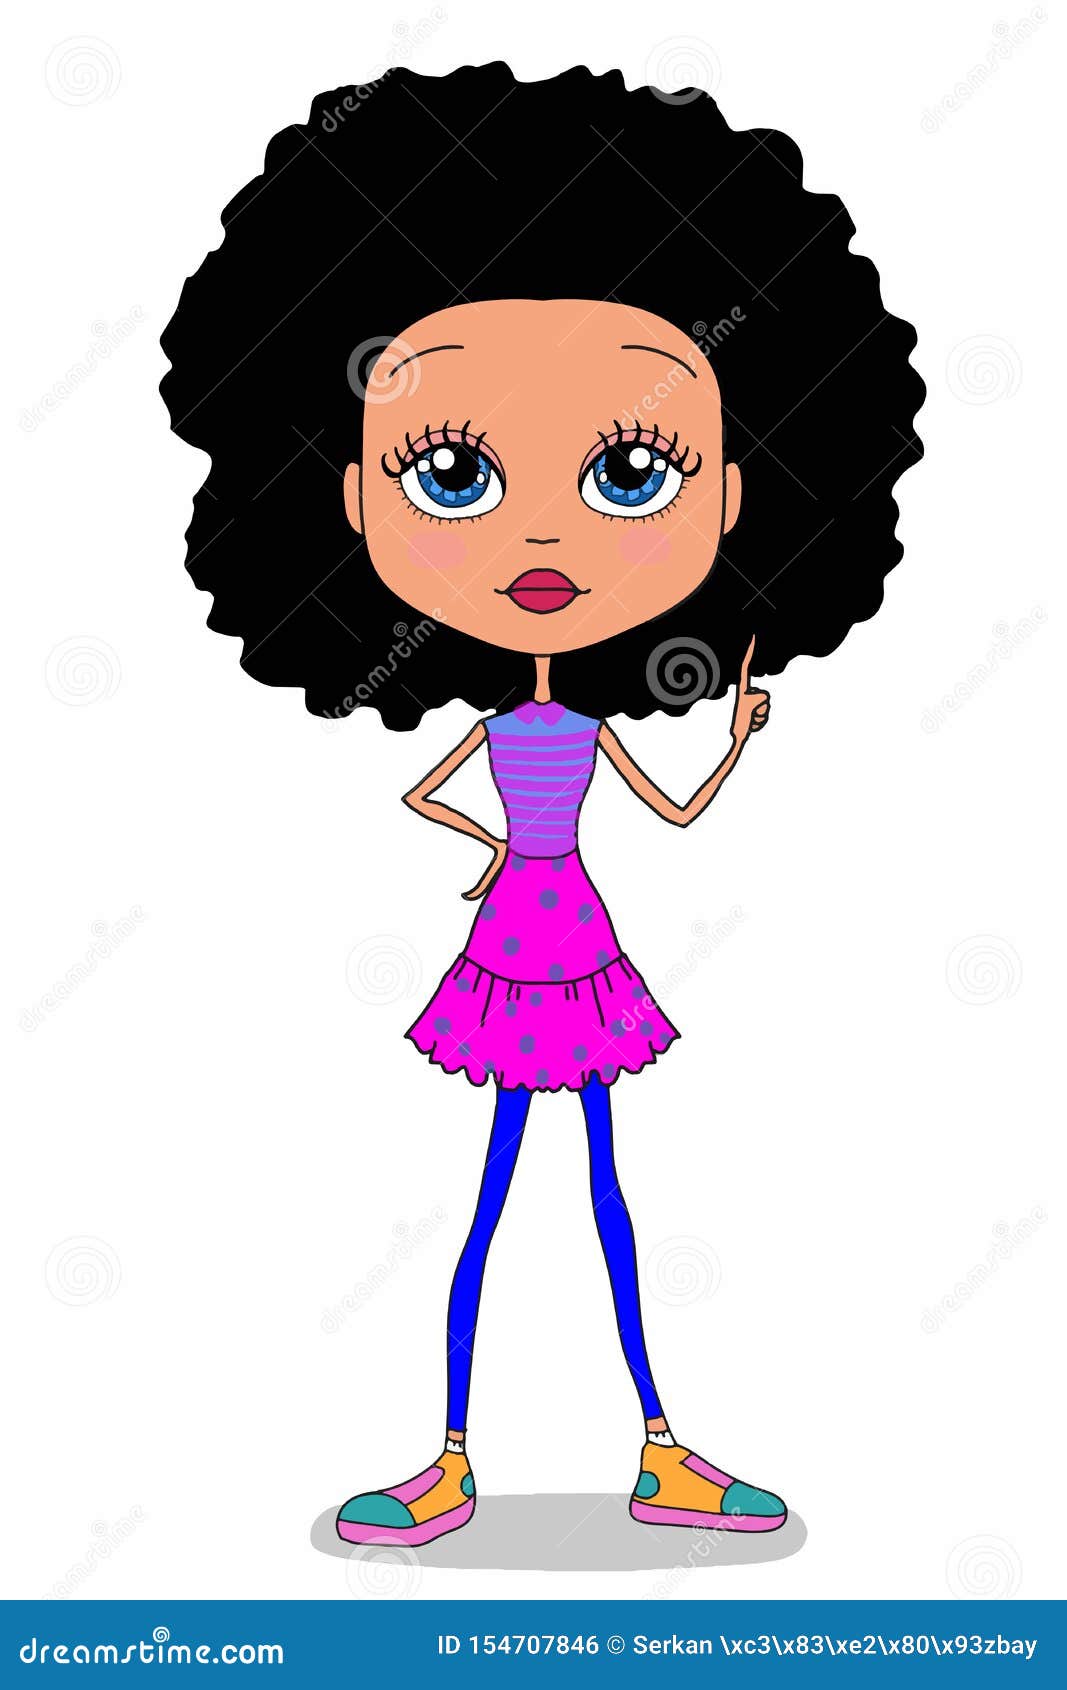 Cute Sweet Cartoon Curly Hair Girl Characters Illustration Drawing White  Background Stock Vector - Illustration of cartoon, characters: 154707846